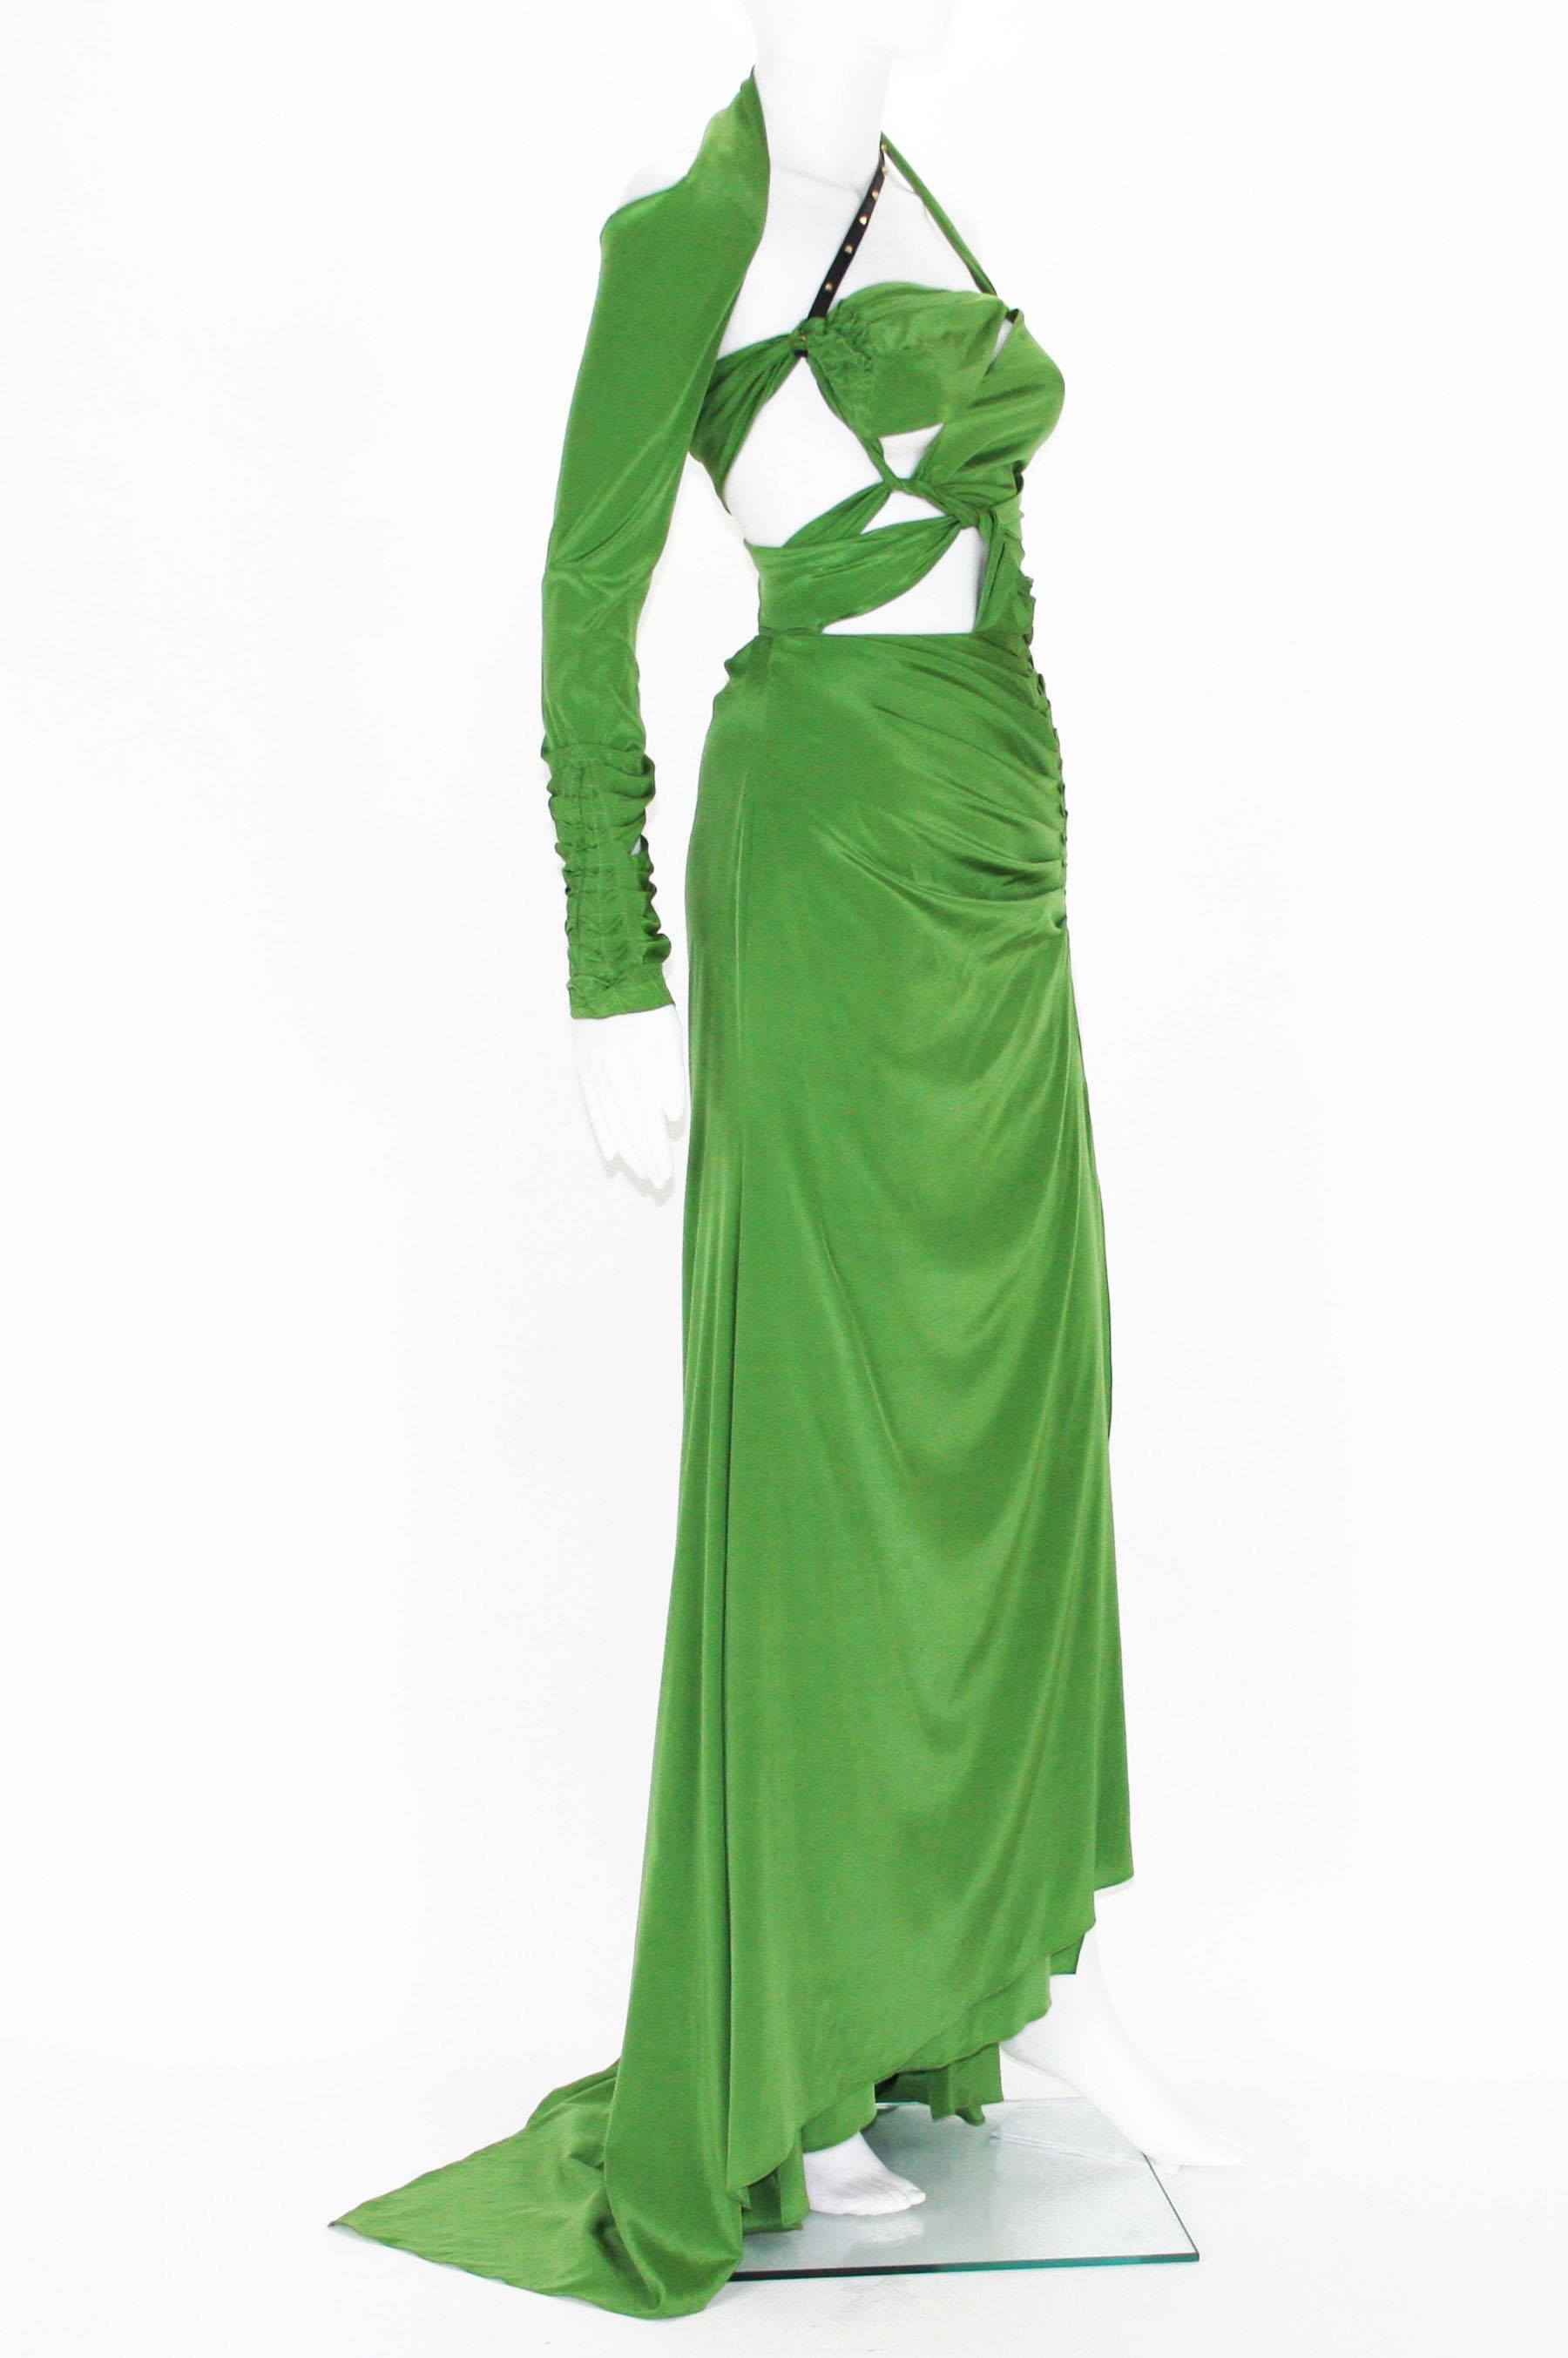 Tom Ford for Gucci Silk Green Bondage Long Dress Gown
2003 Collection
Designer size - 42 (run smaller)
85% Silk, 10% Spandex, 5% Leather
Cut-out and ruched design, leather studded strap, high slit, side zip closure, very stretch.
Made in